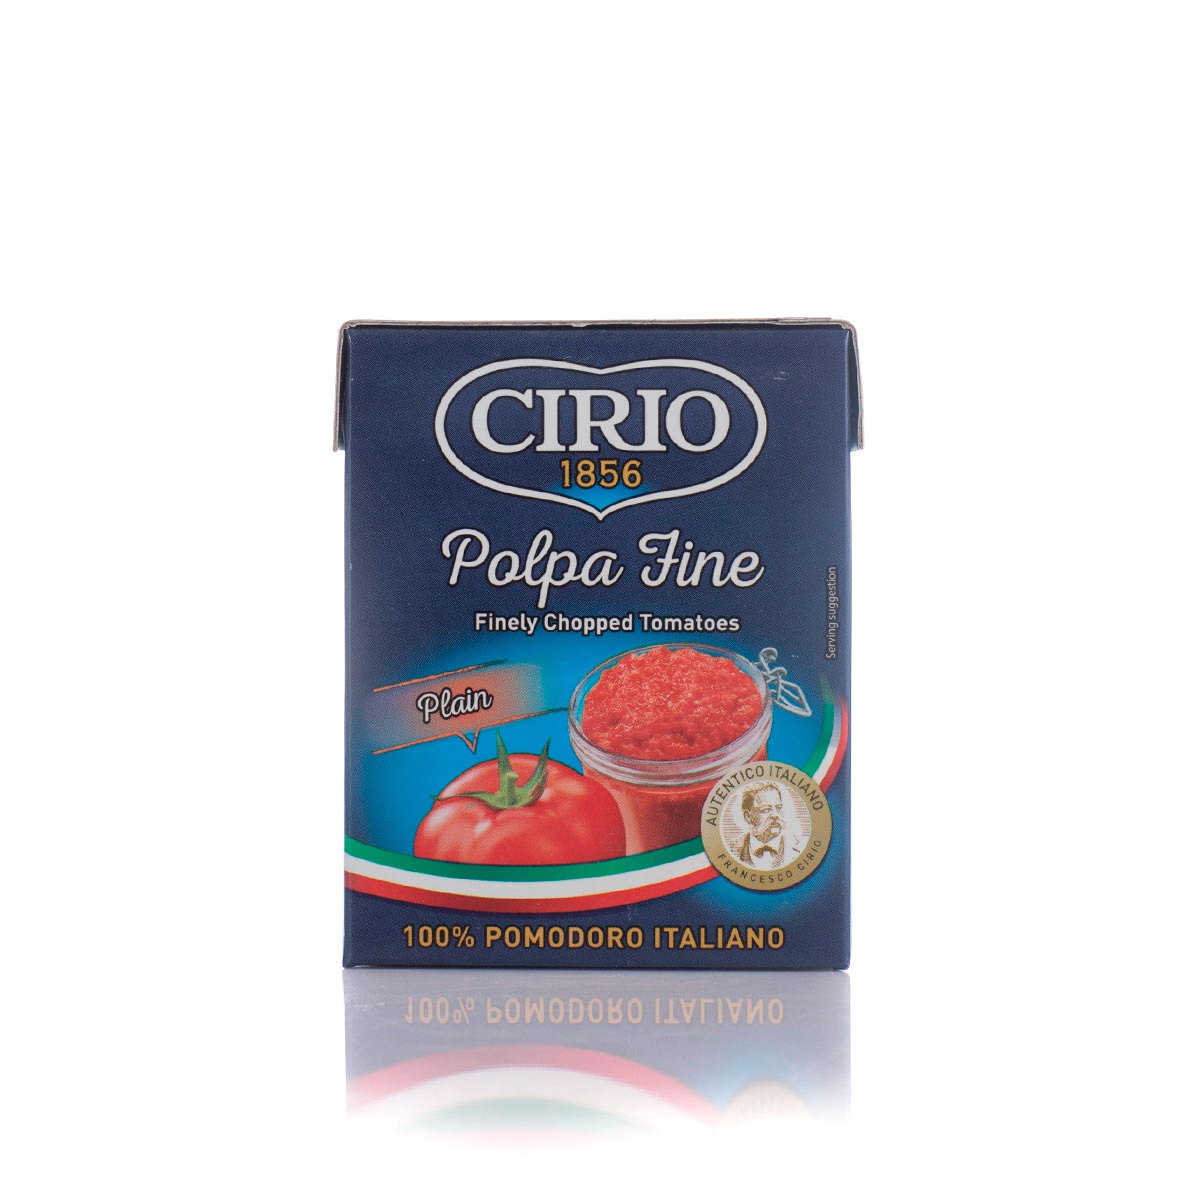 Cirio Finely Chopped Tomatoes 390G - CIRIO - Processed/ Preserved Vegetables - in Sri Lanka